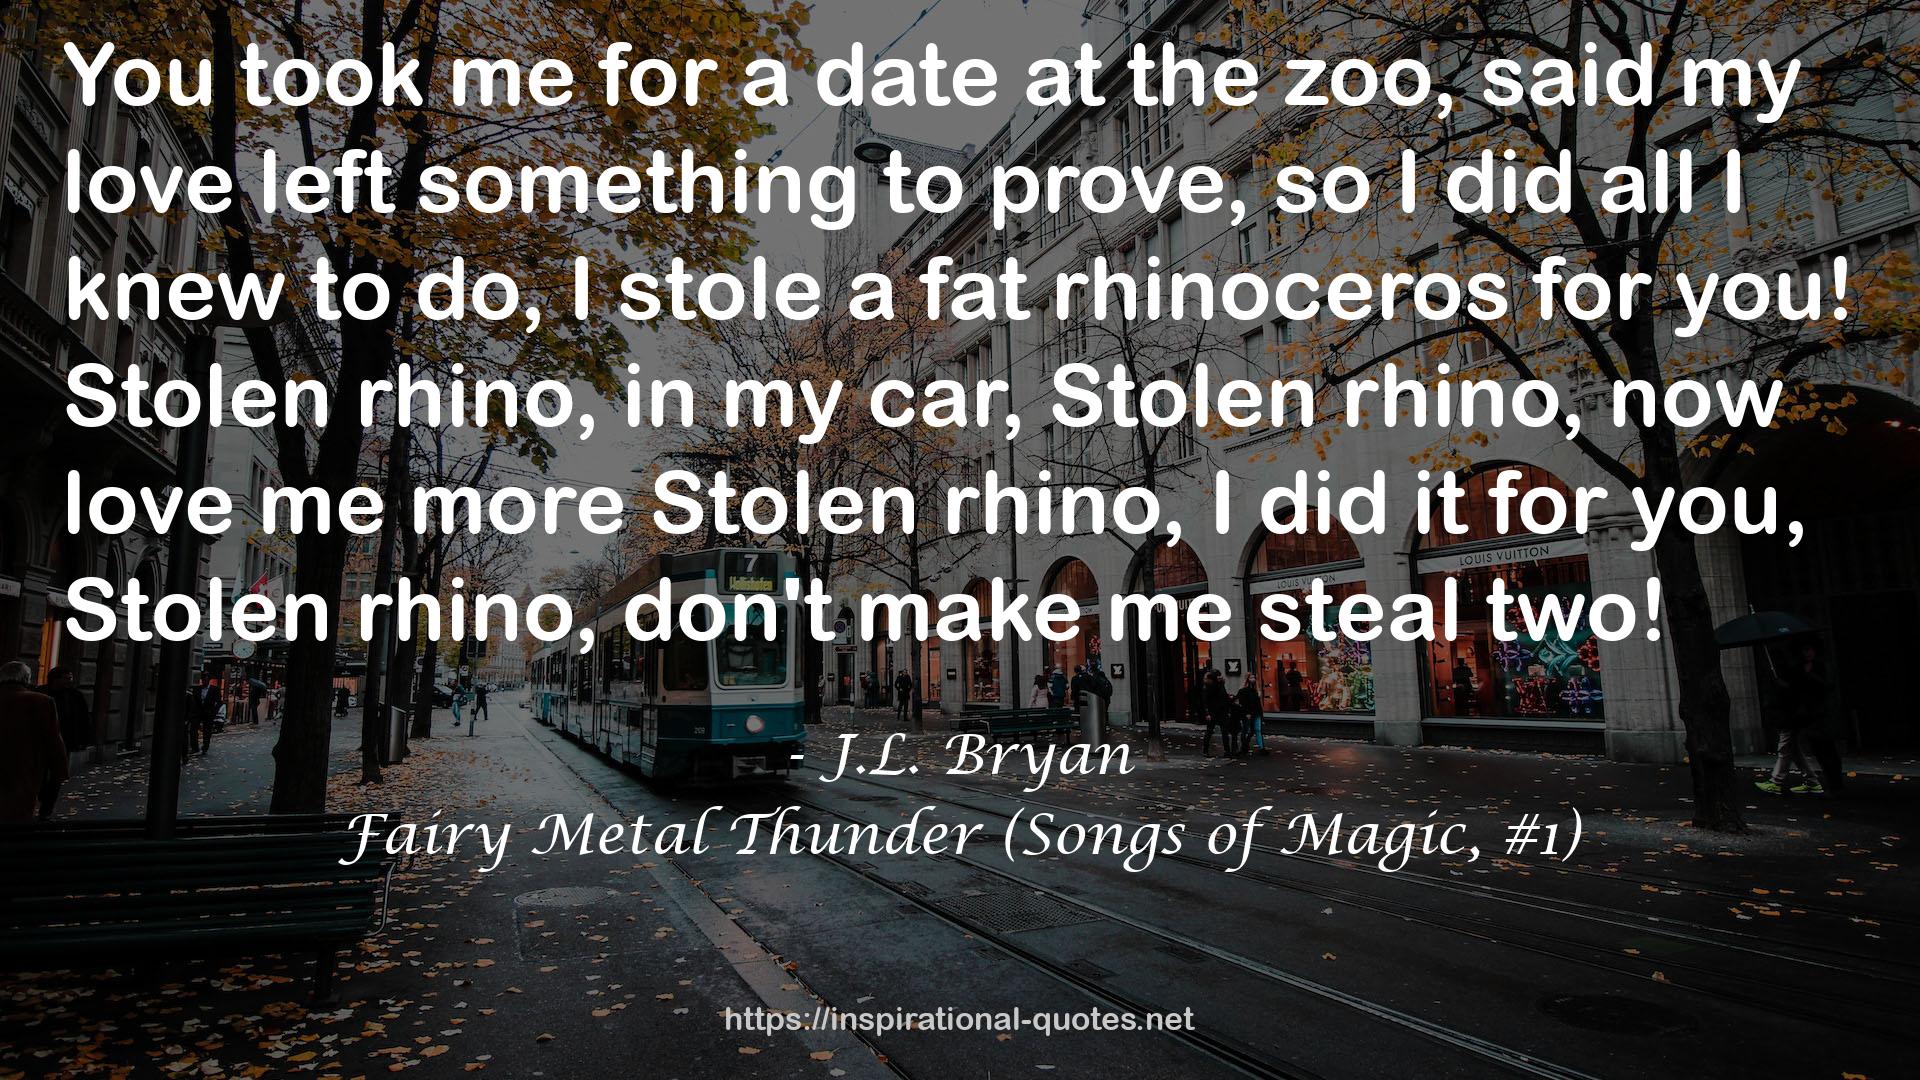 Fairy Metal Thunder (Songs of Magic, #1) QUOTES